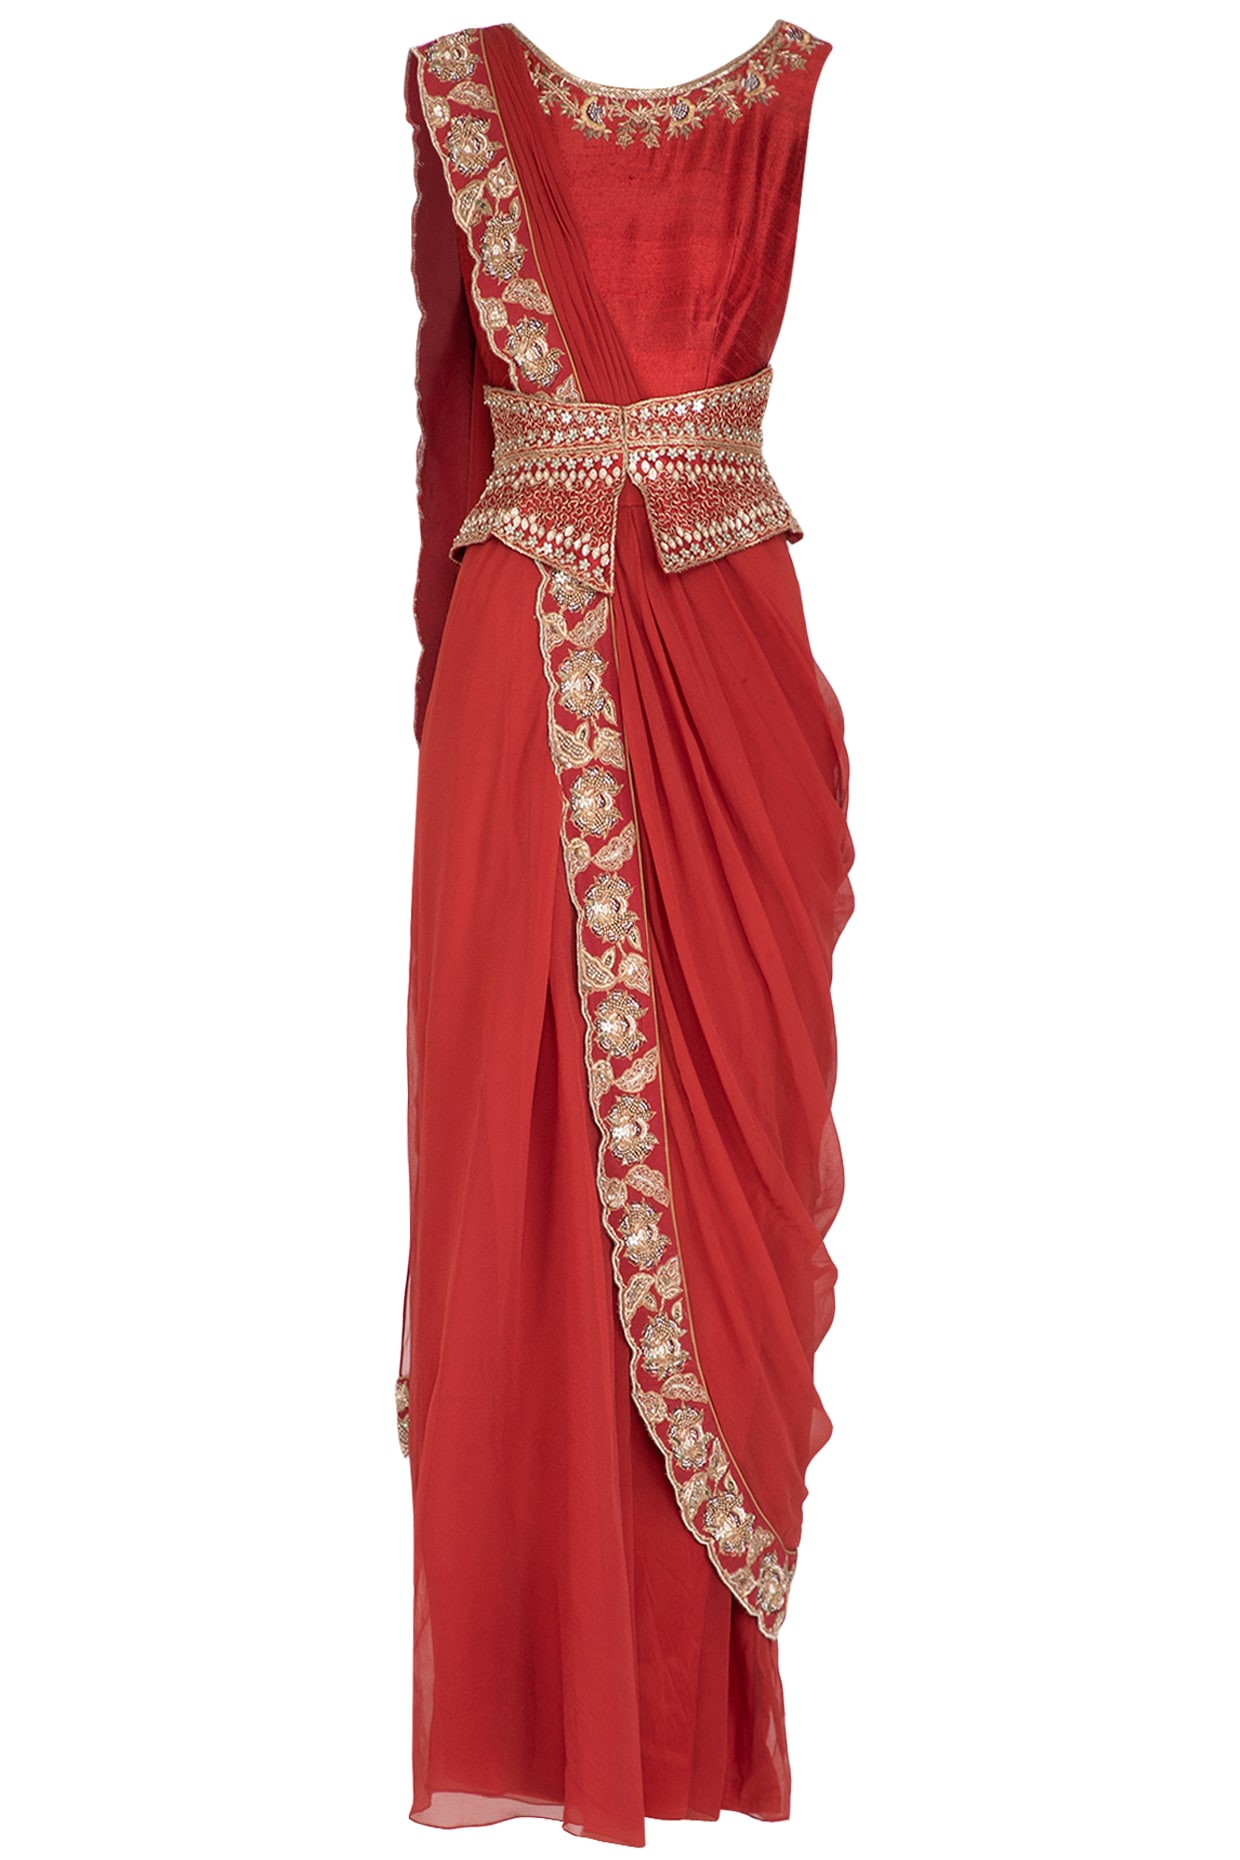 1920s inspired indian style | The Luxe Report